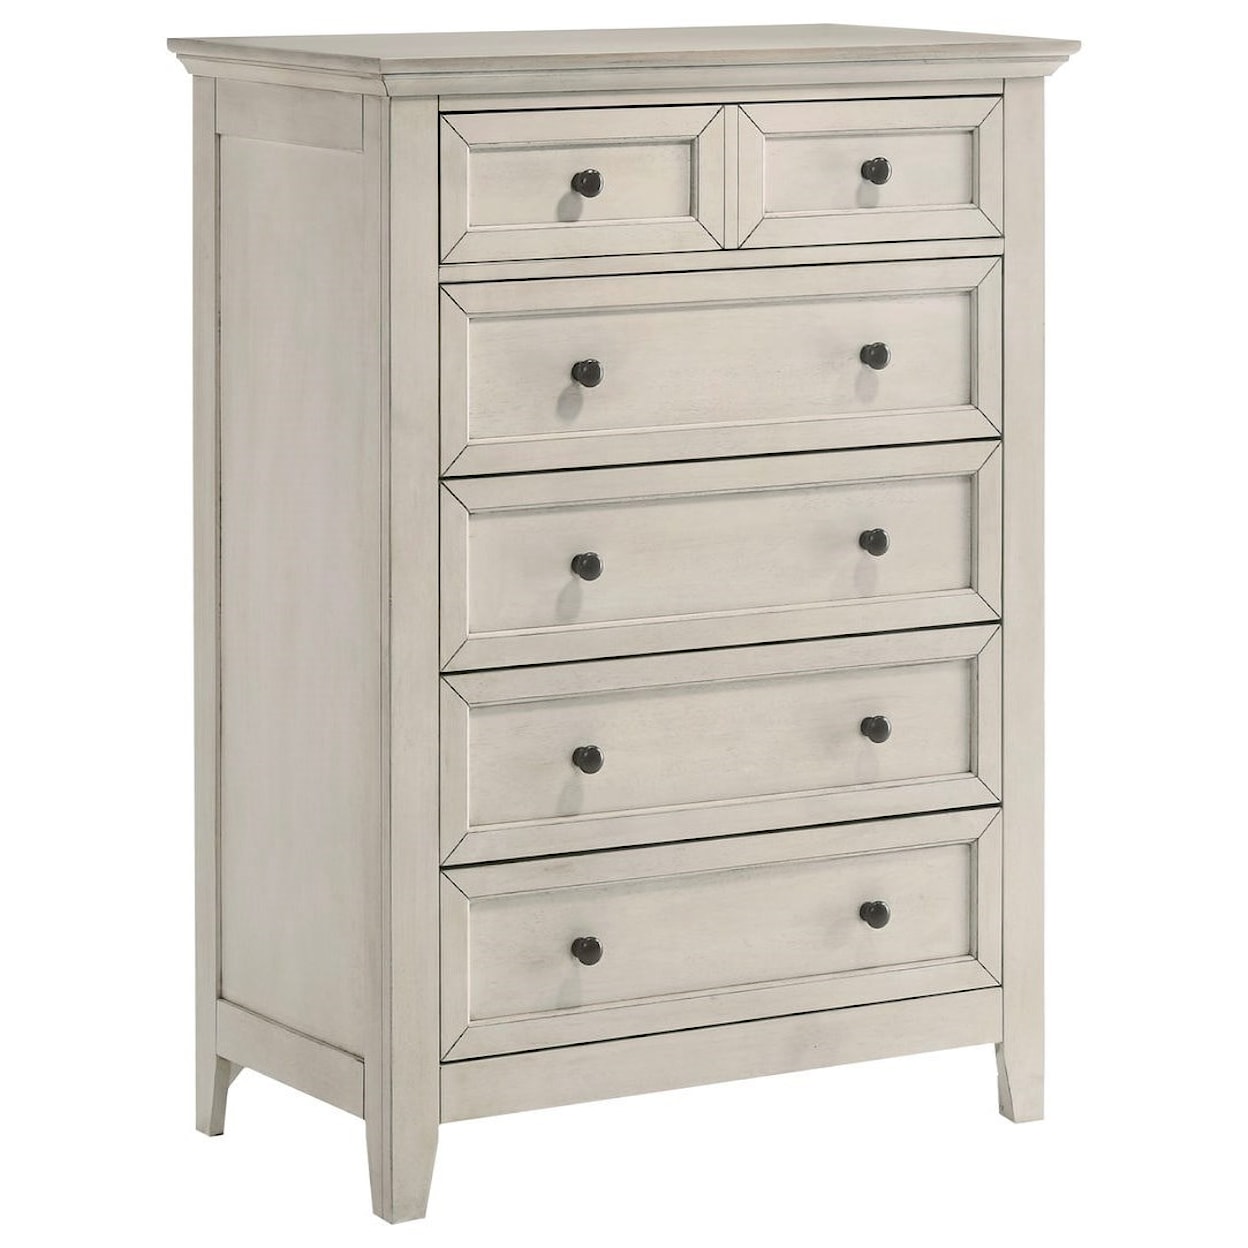 Intercon San Mateo Youth Youth Chest of Drawers